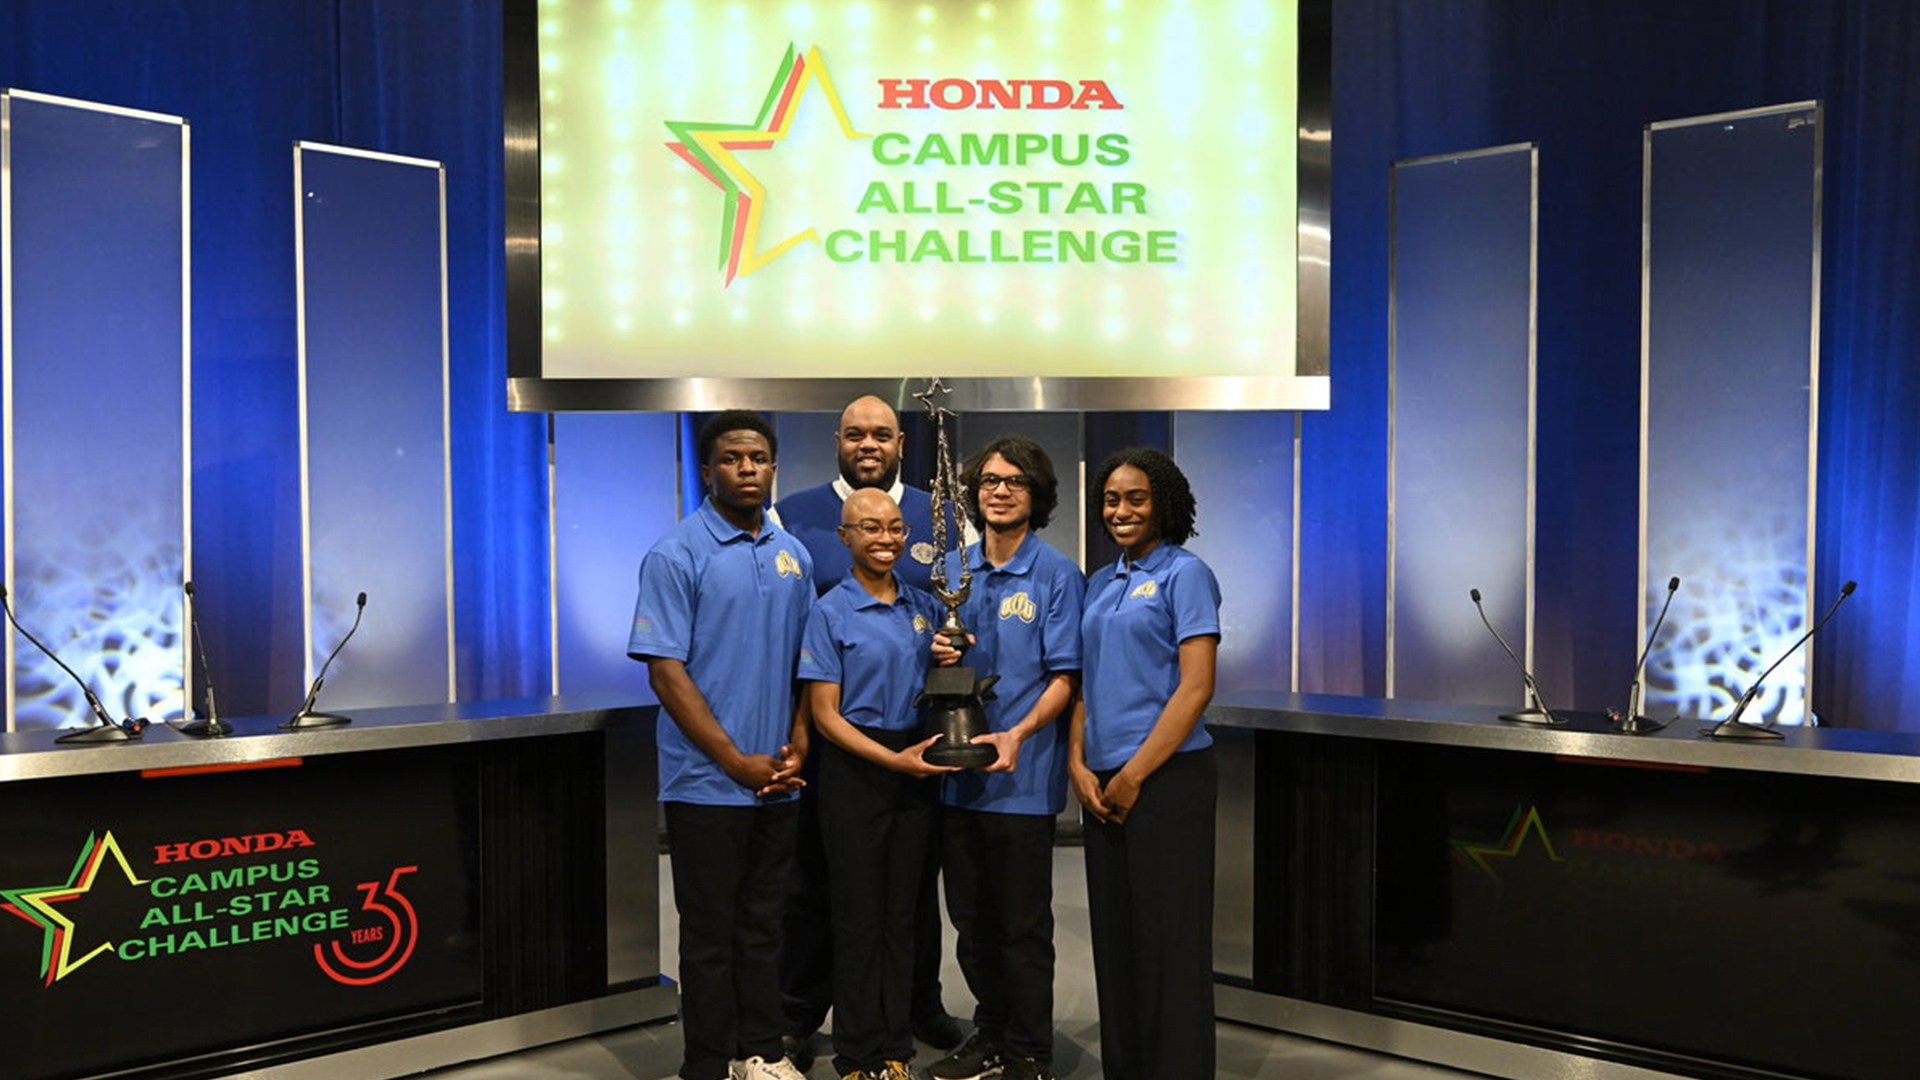 Oakwood University Emerges as the New National Champion at the 35th Honda Campus All-Star Challenge